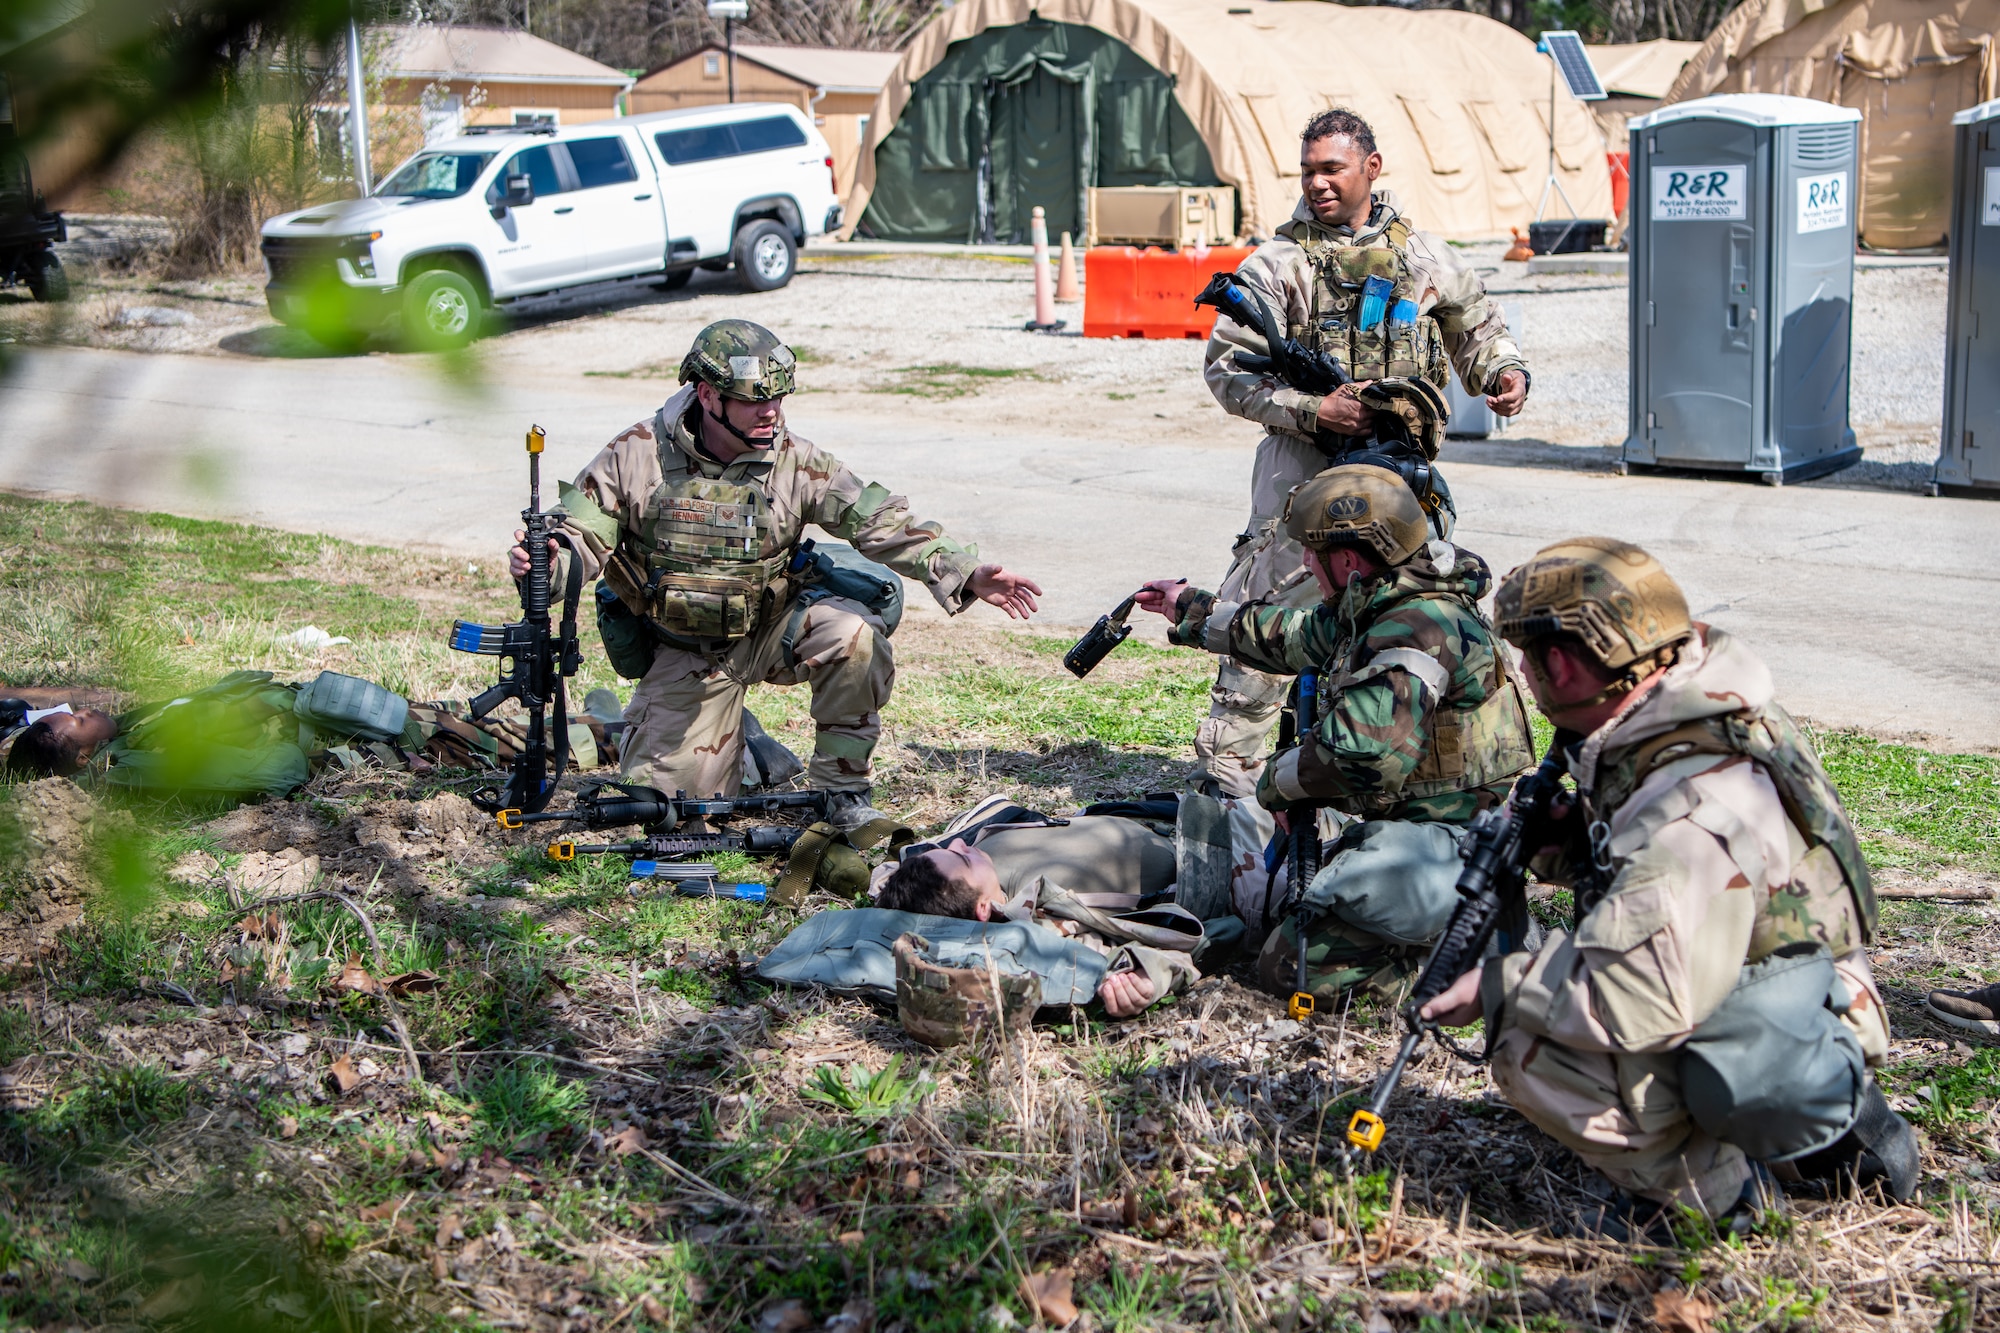 A group of Airmen simulate treating a casualty